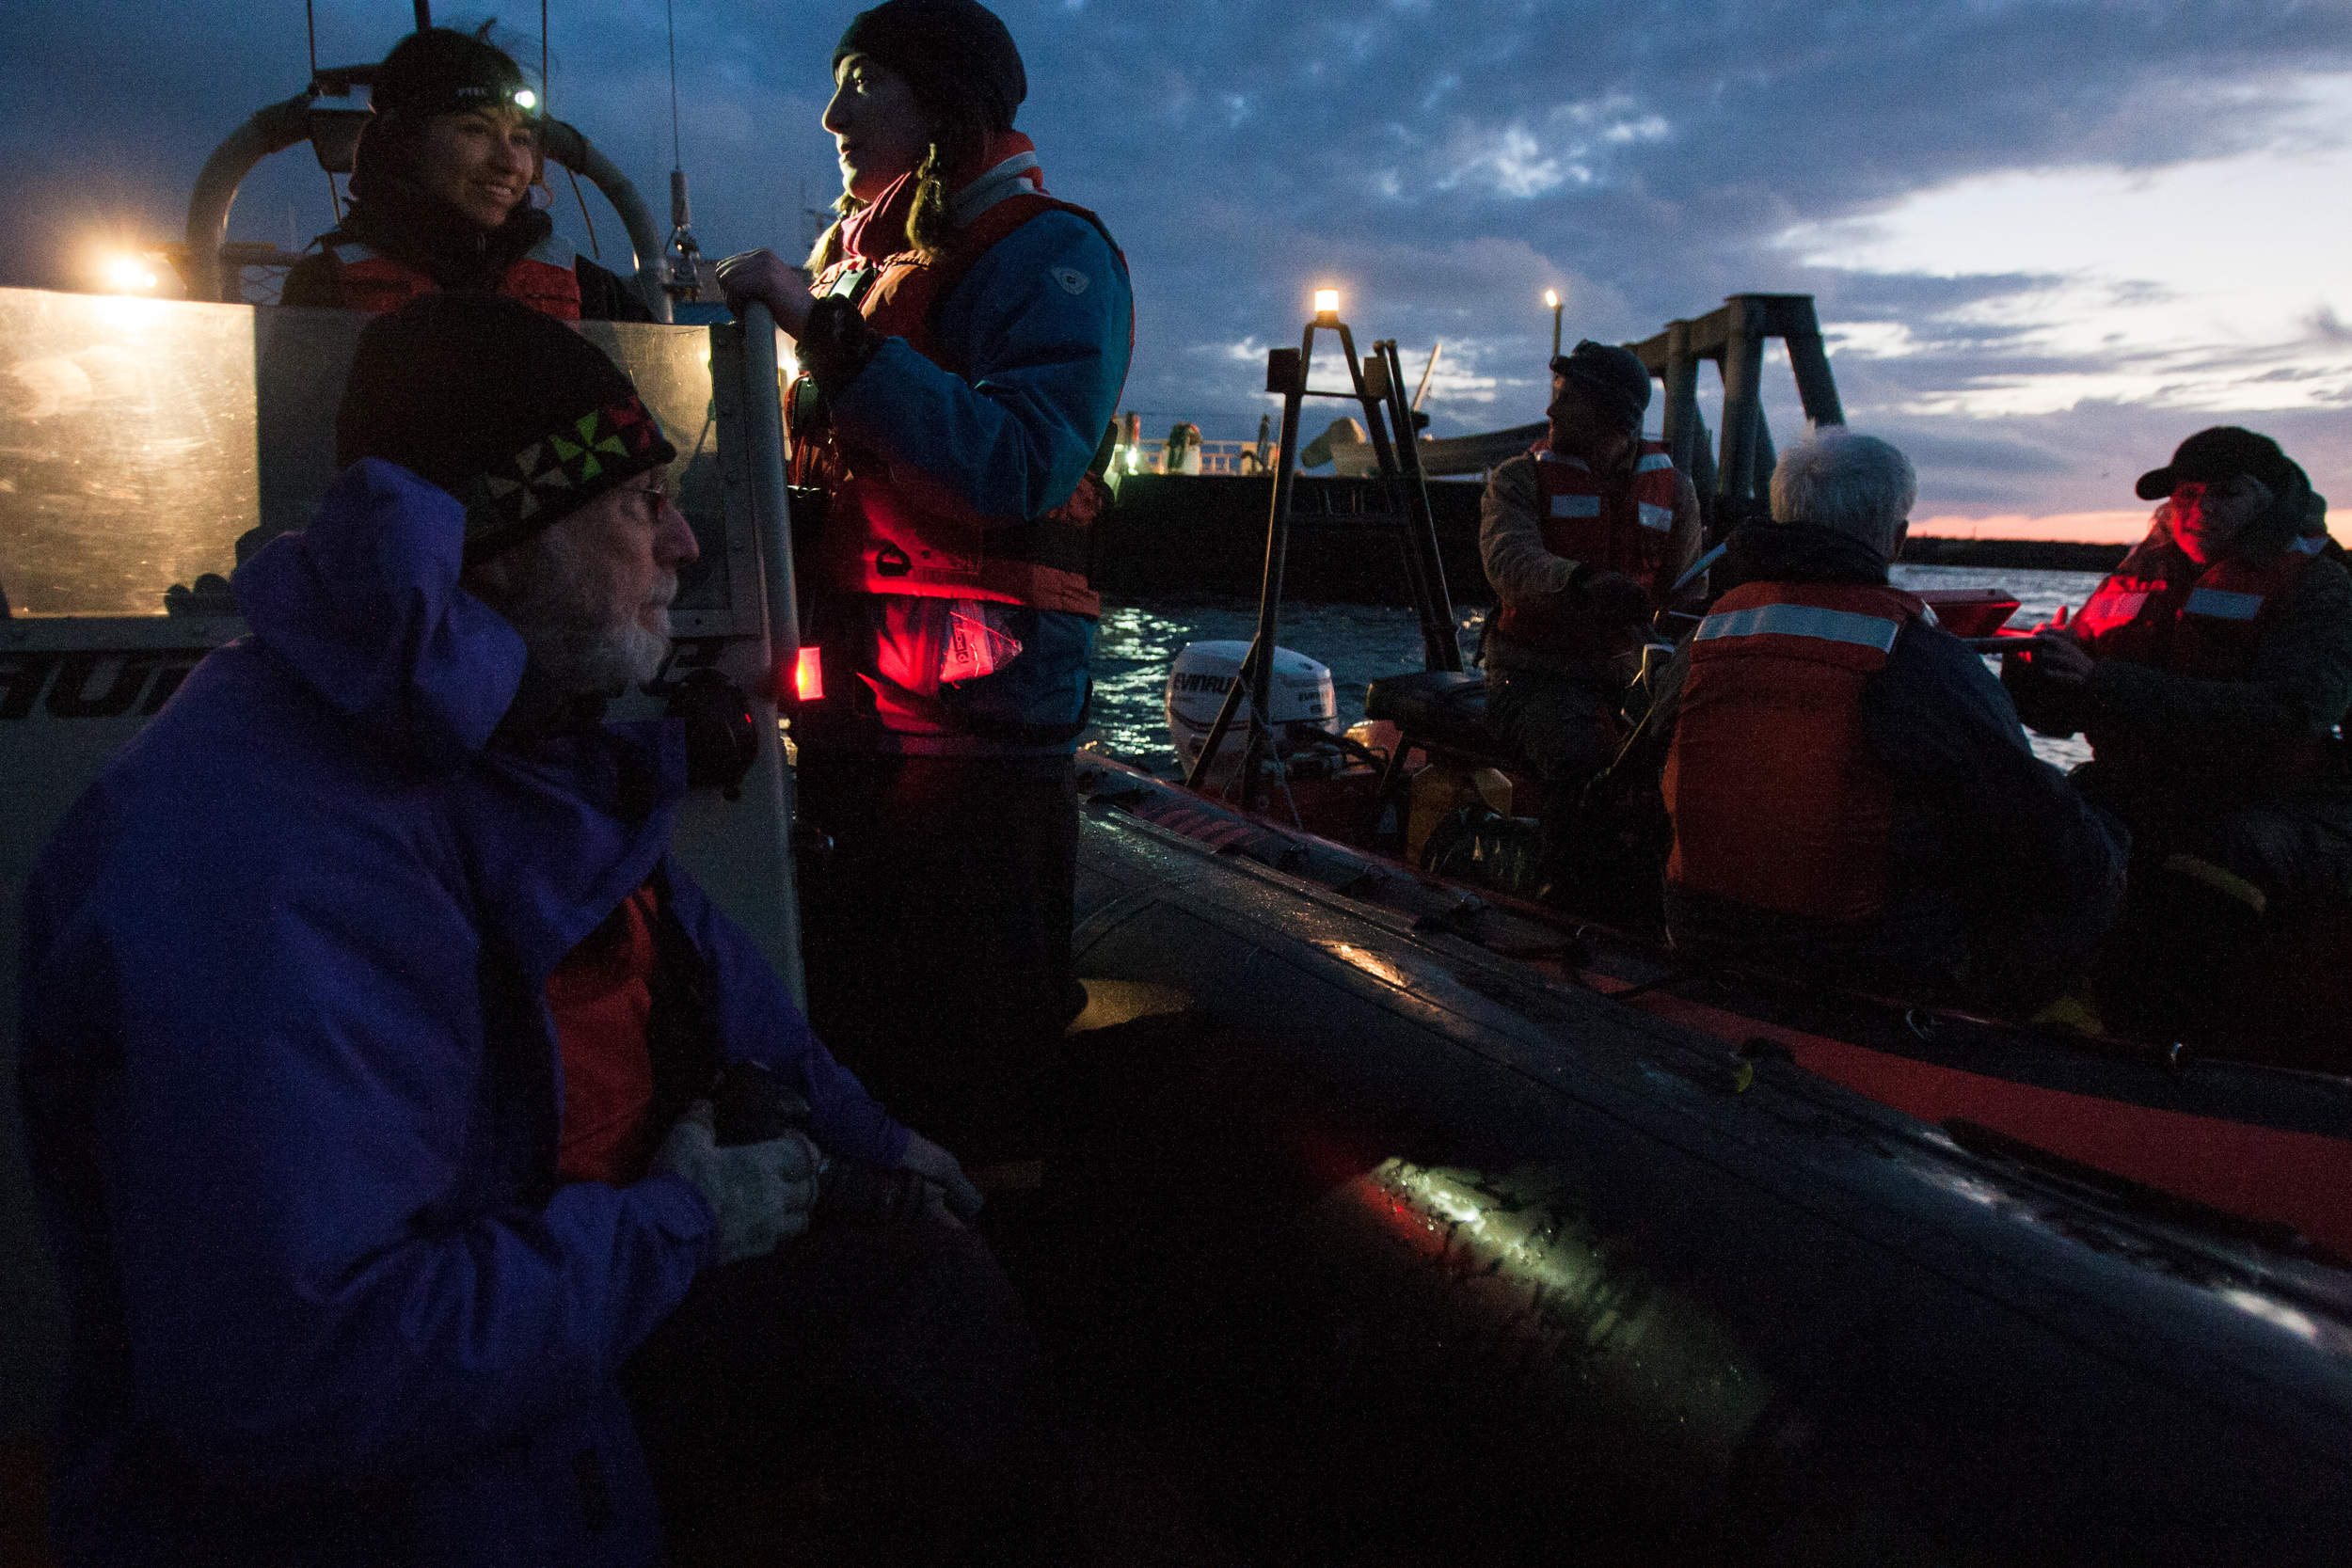  In the early morning light,&nbsp;Greenpeace activists and members of the media prepare to meet the Polar Pioneer as it arrived in Port Angeles, Washington on April 17, 2015.&nbsp; 